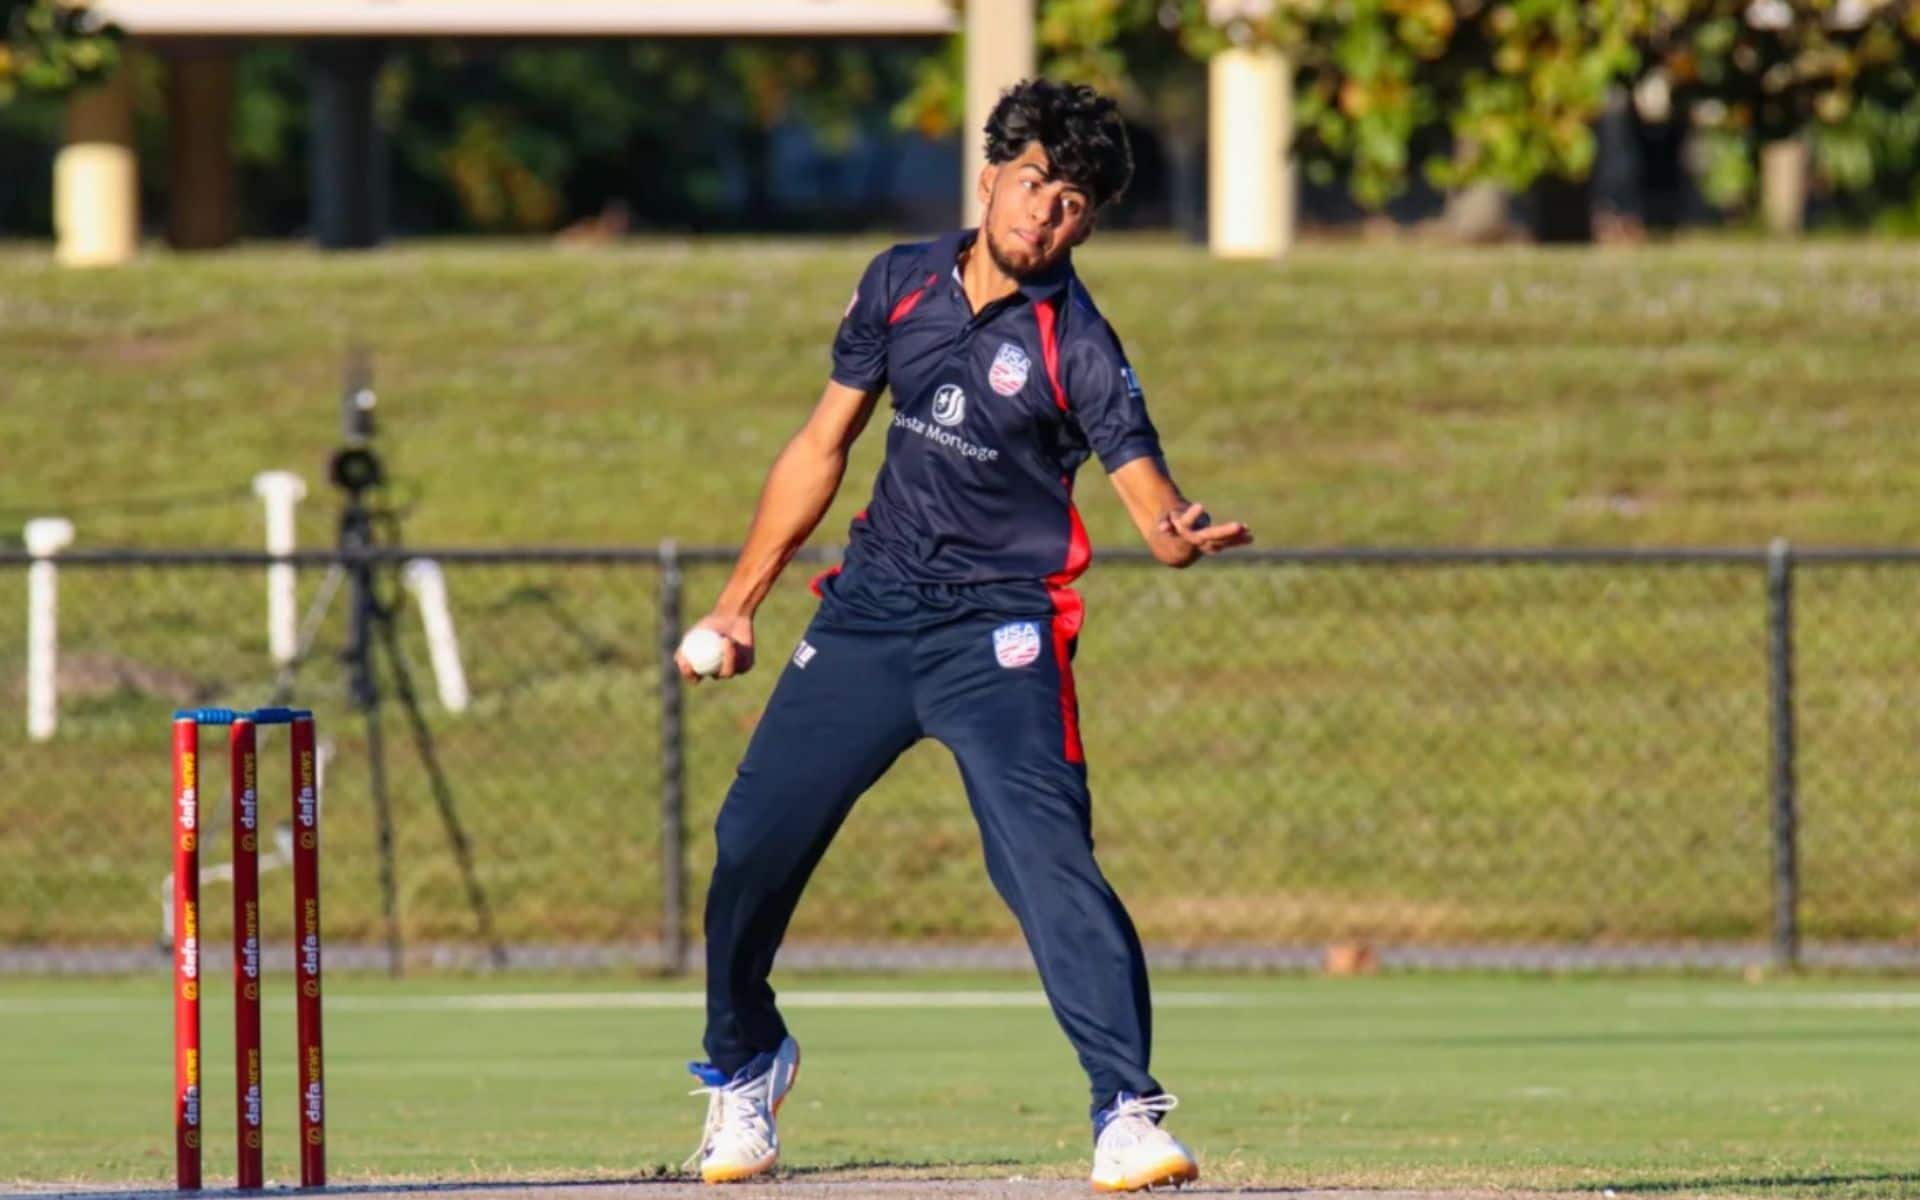 Yasir Mohammad in action for USA (x.com)